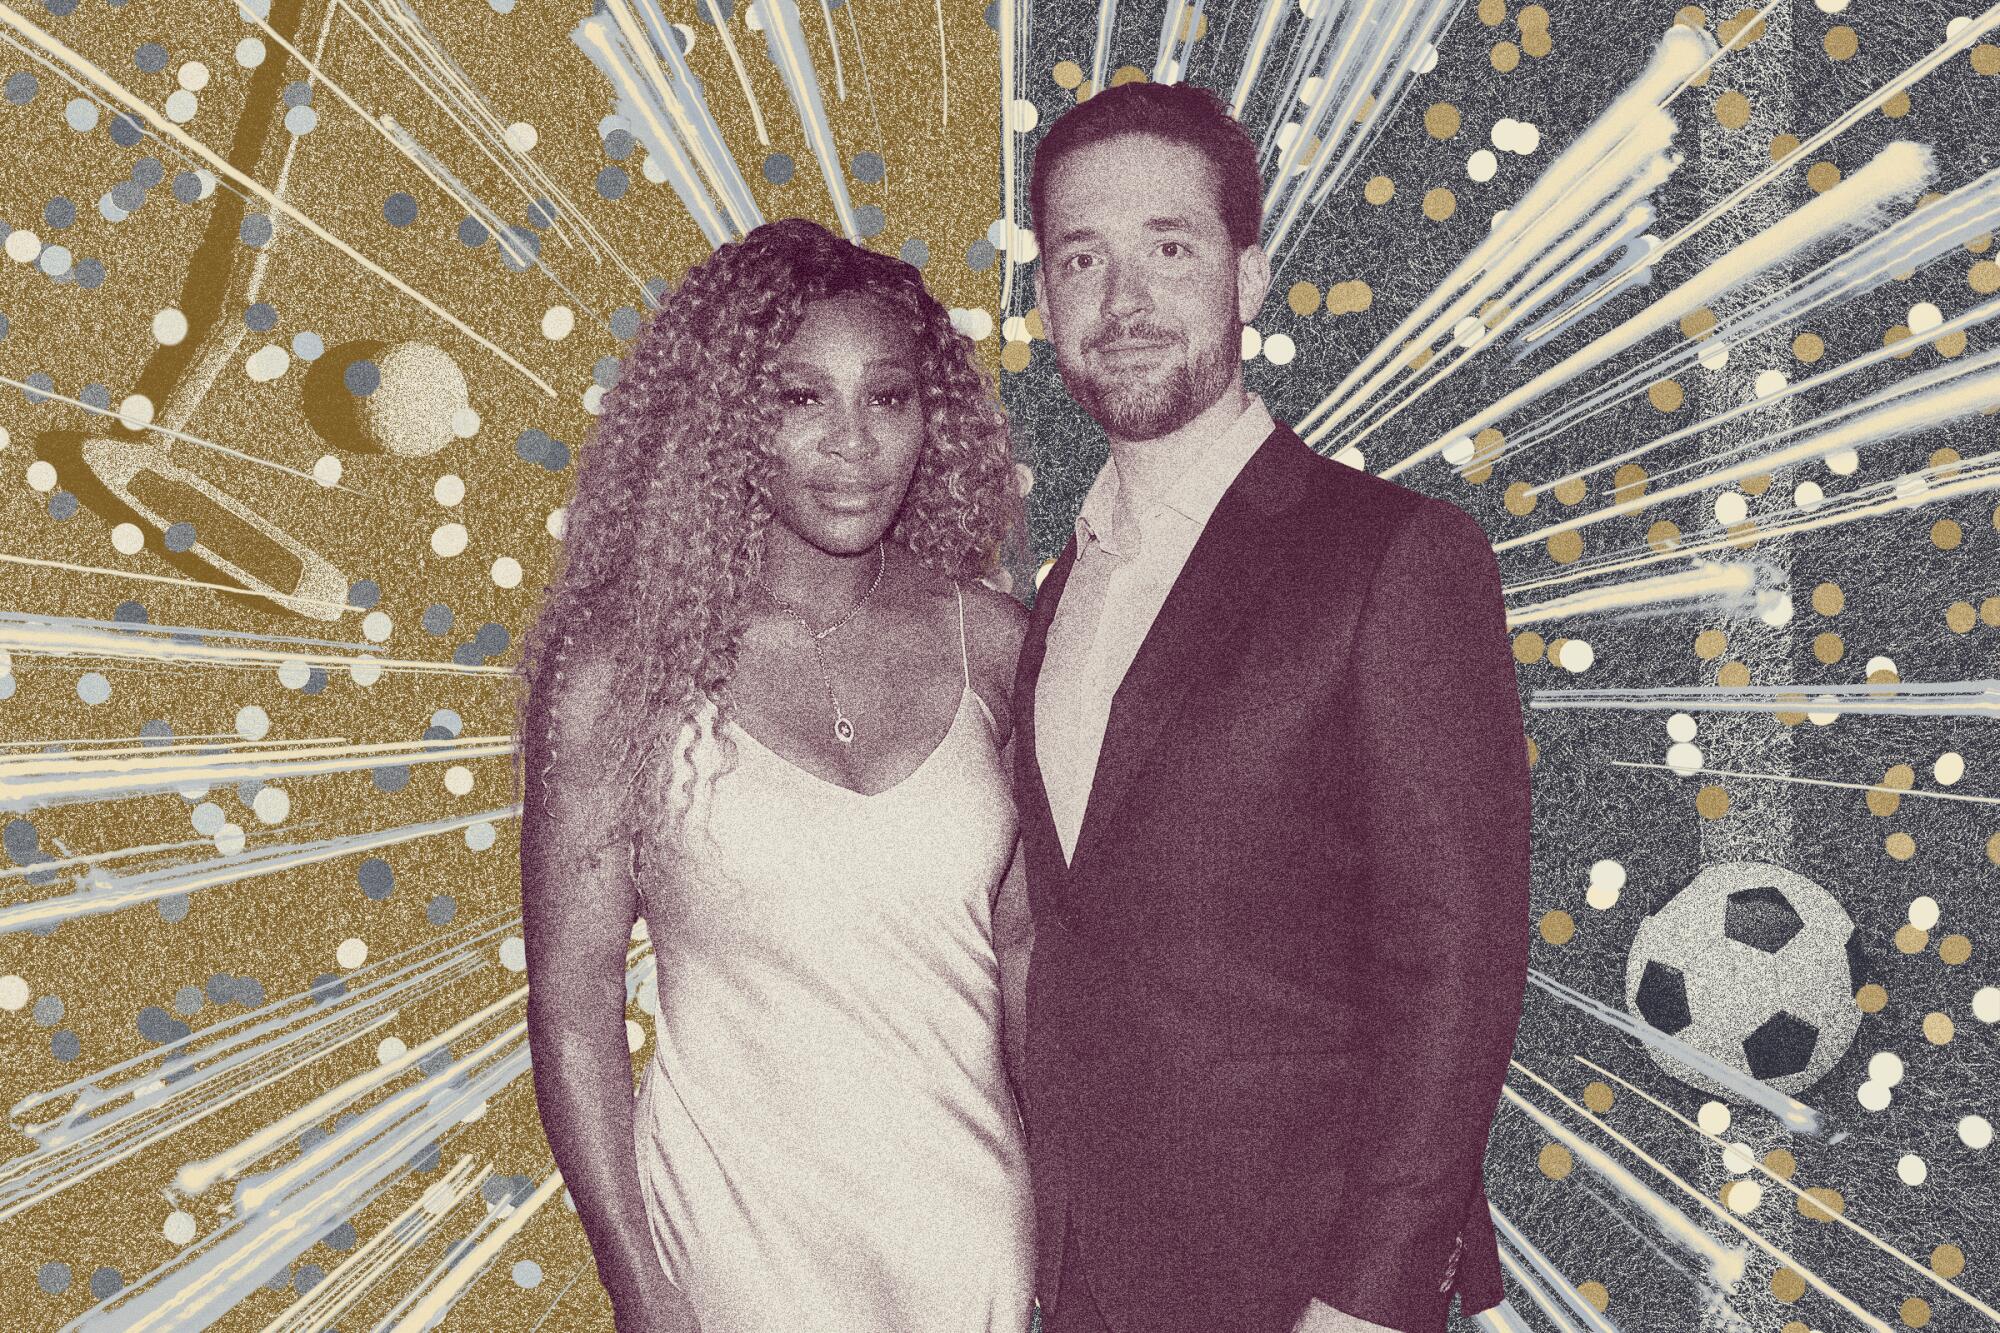 Serena Williams and Alexis Ohanian at a fancy soccer-themed event